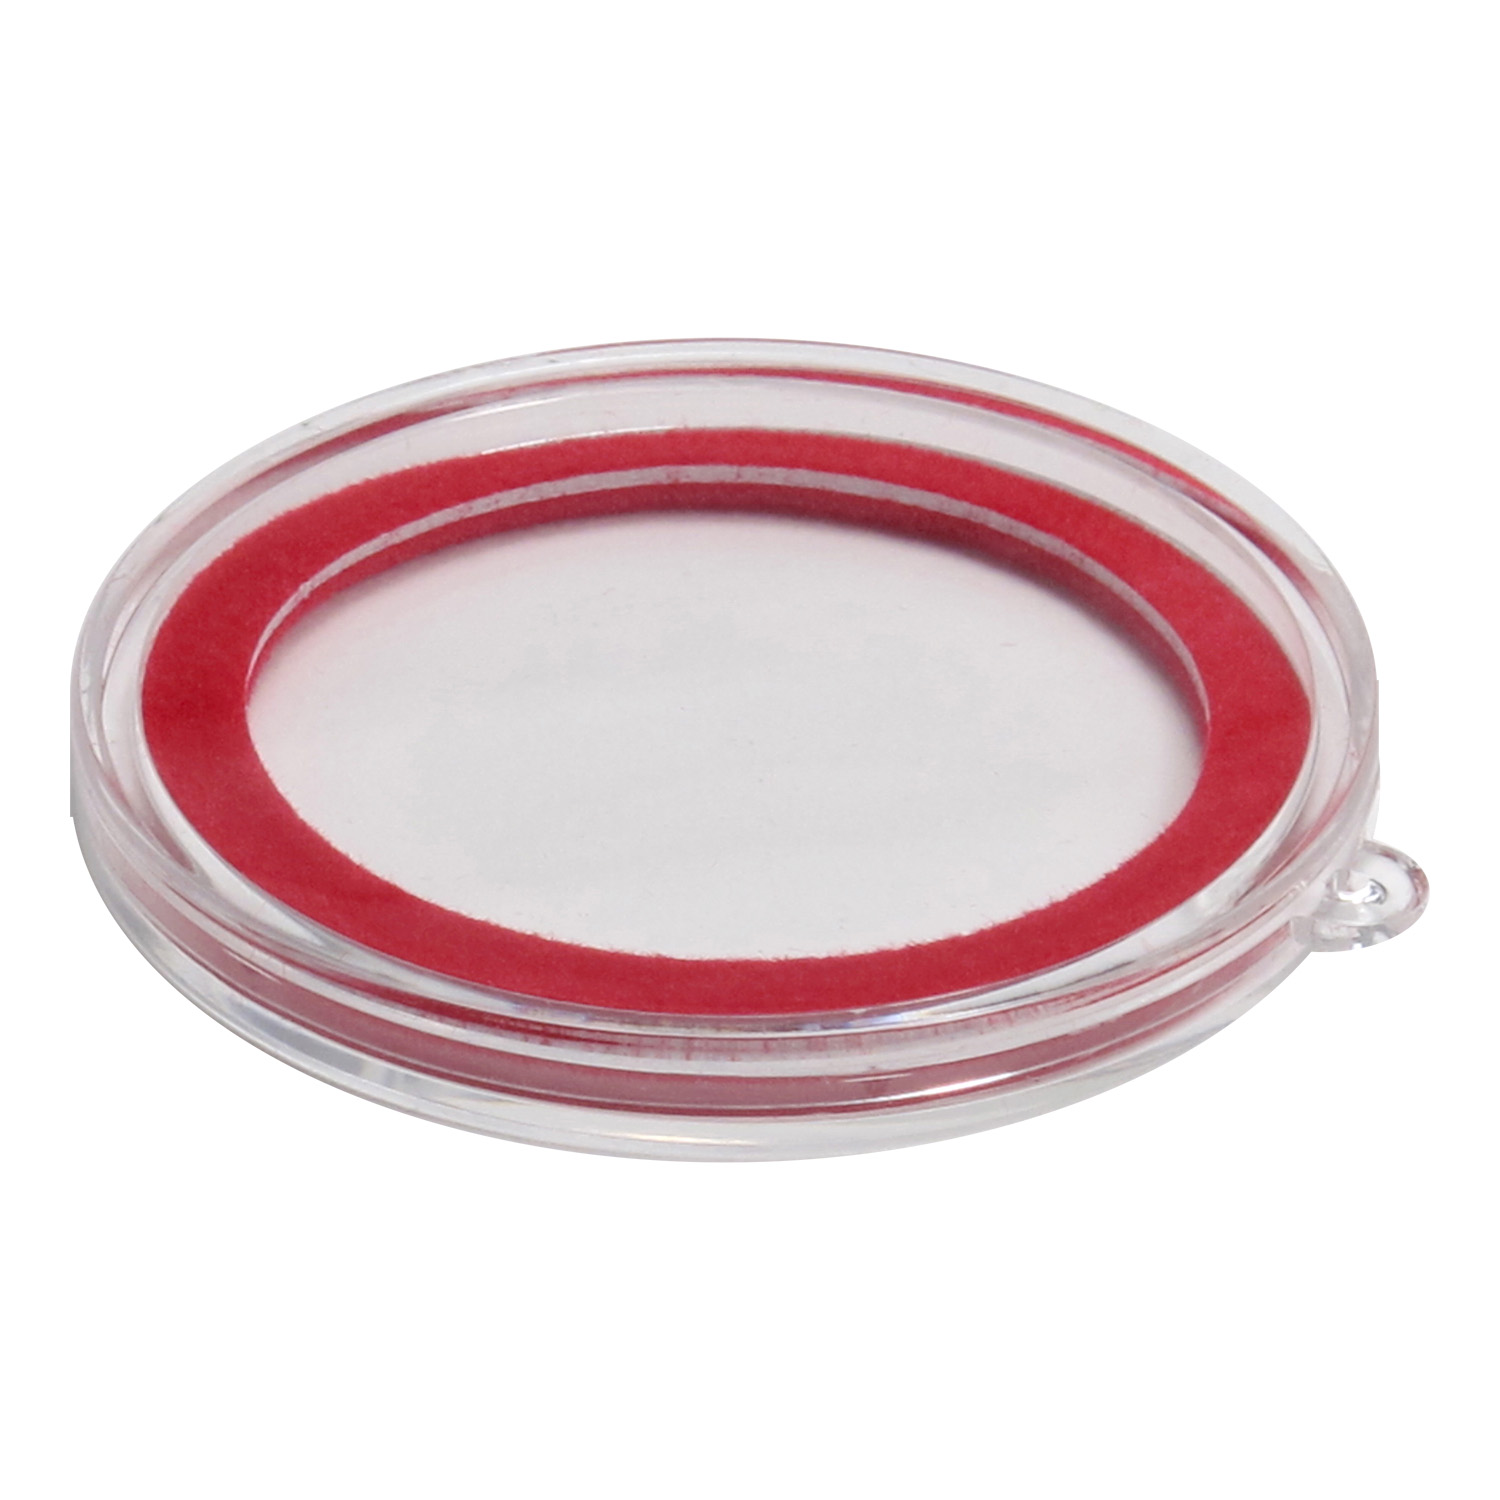 Buy Ornament Capsule for Silver Coins/Rounds - 38 mm (Red Ring)